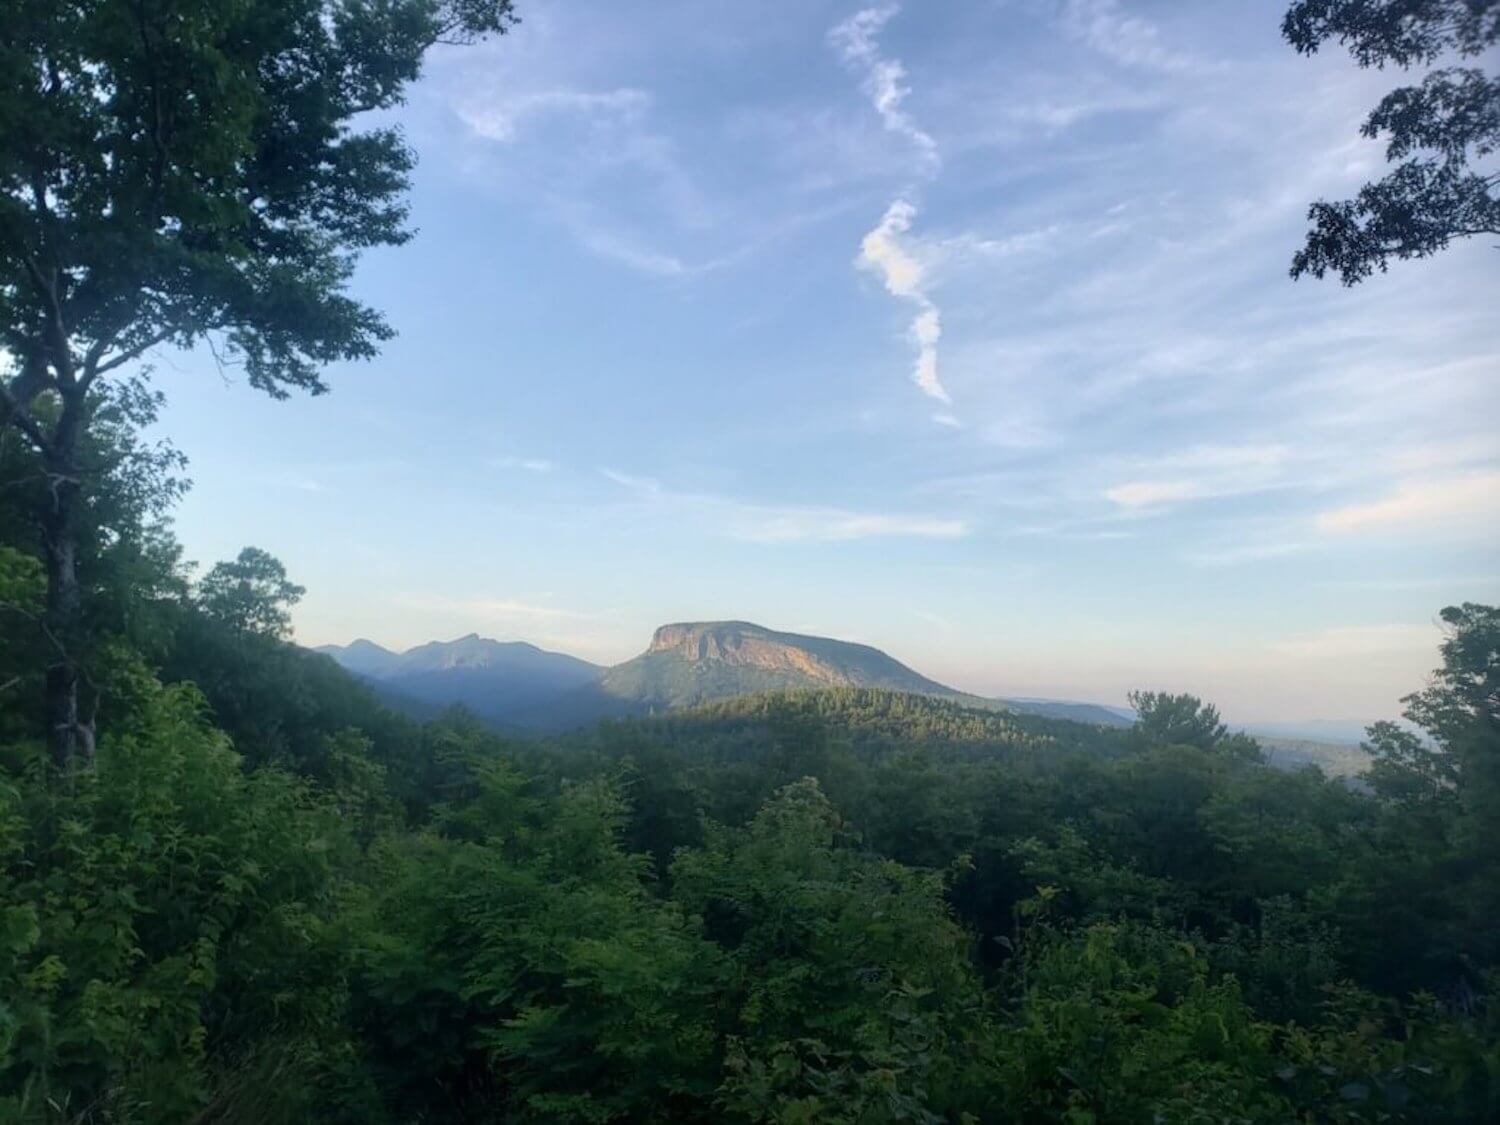 table rock in linville gorge traveling alone